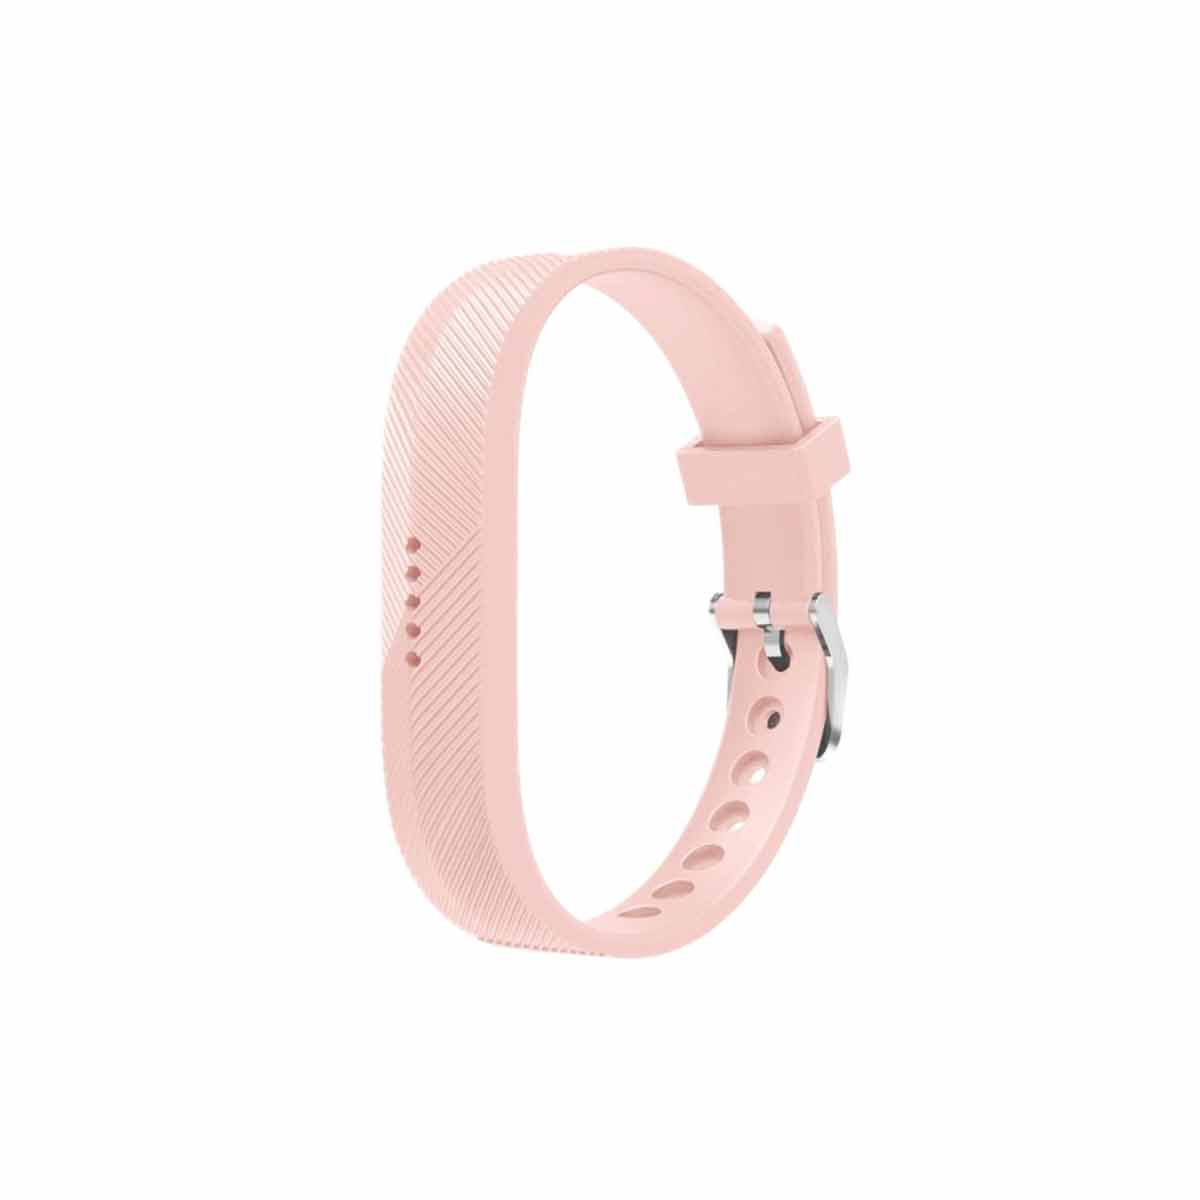 Secure Fitbit Flex 2 Band Replacement Strap with Buckle Pink  